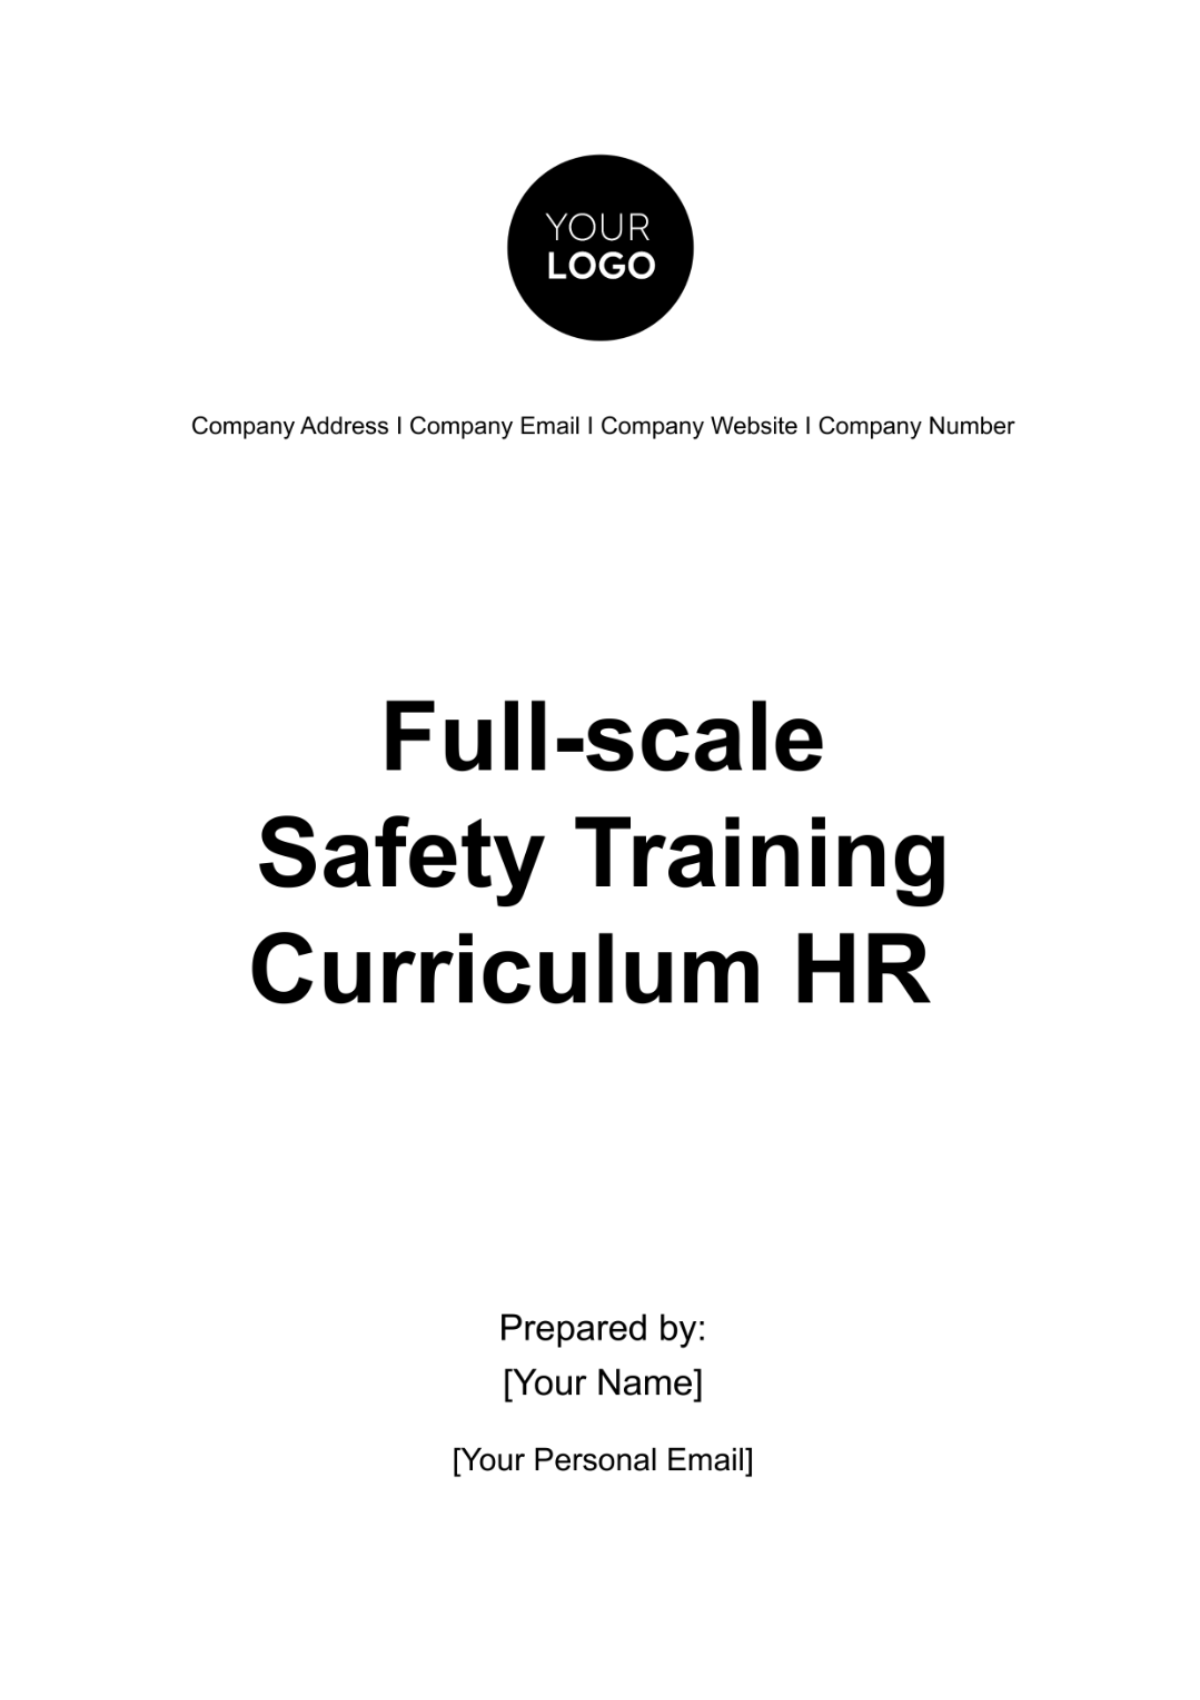 Full-scale Safety Training Curriculum HR Template